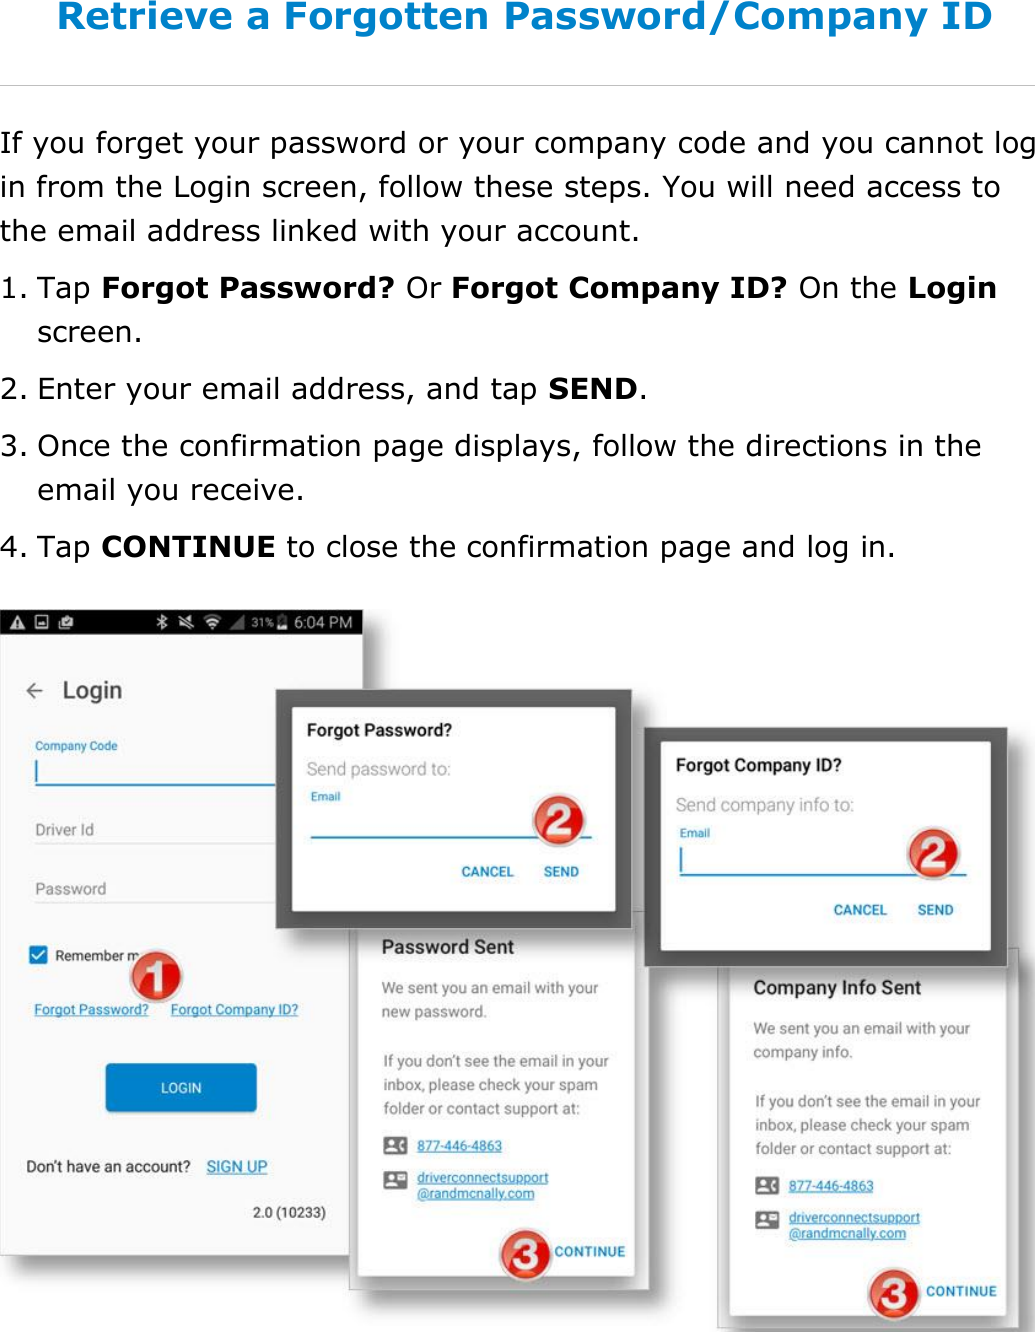 Set My Duty Status DriverConnect User Guide  18 © 2016-2017, Rand McNally, Inc. Retrieve a Forgotten Password/Company ID If you forget your password or your company code and you cannot log in from the Login screen, follow these steps. You will need access to the email address linked with your account. 1. Tap Forgot Password? Or Forgot Company ID? On the Login screen. 2. Enter your email address, and tap SEND. 3. Once the confirmation page displays, follow the directions in the email you receive. 4. Tap CONTINUE to close the confirmation page and log in.    